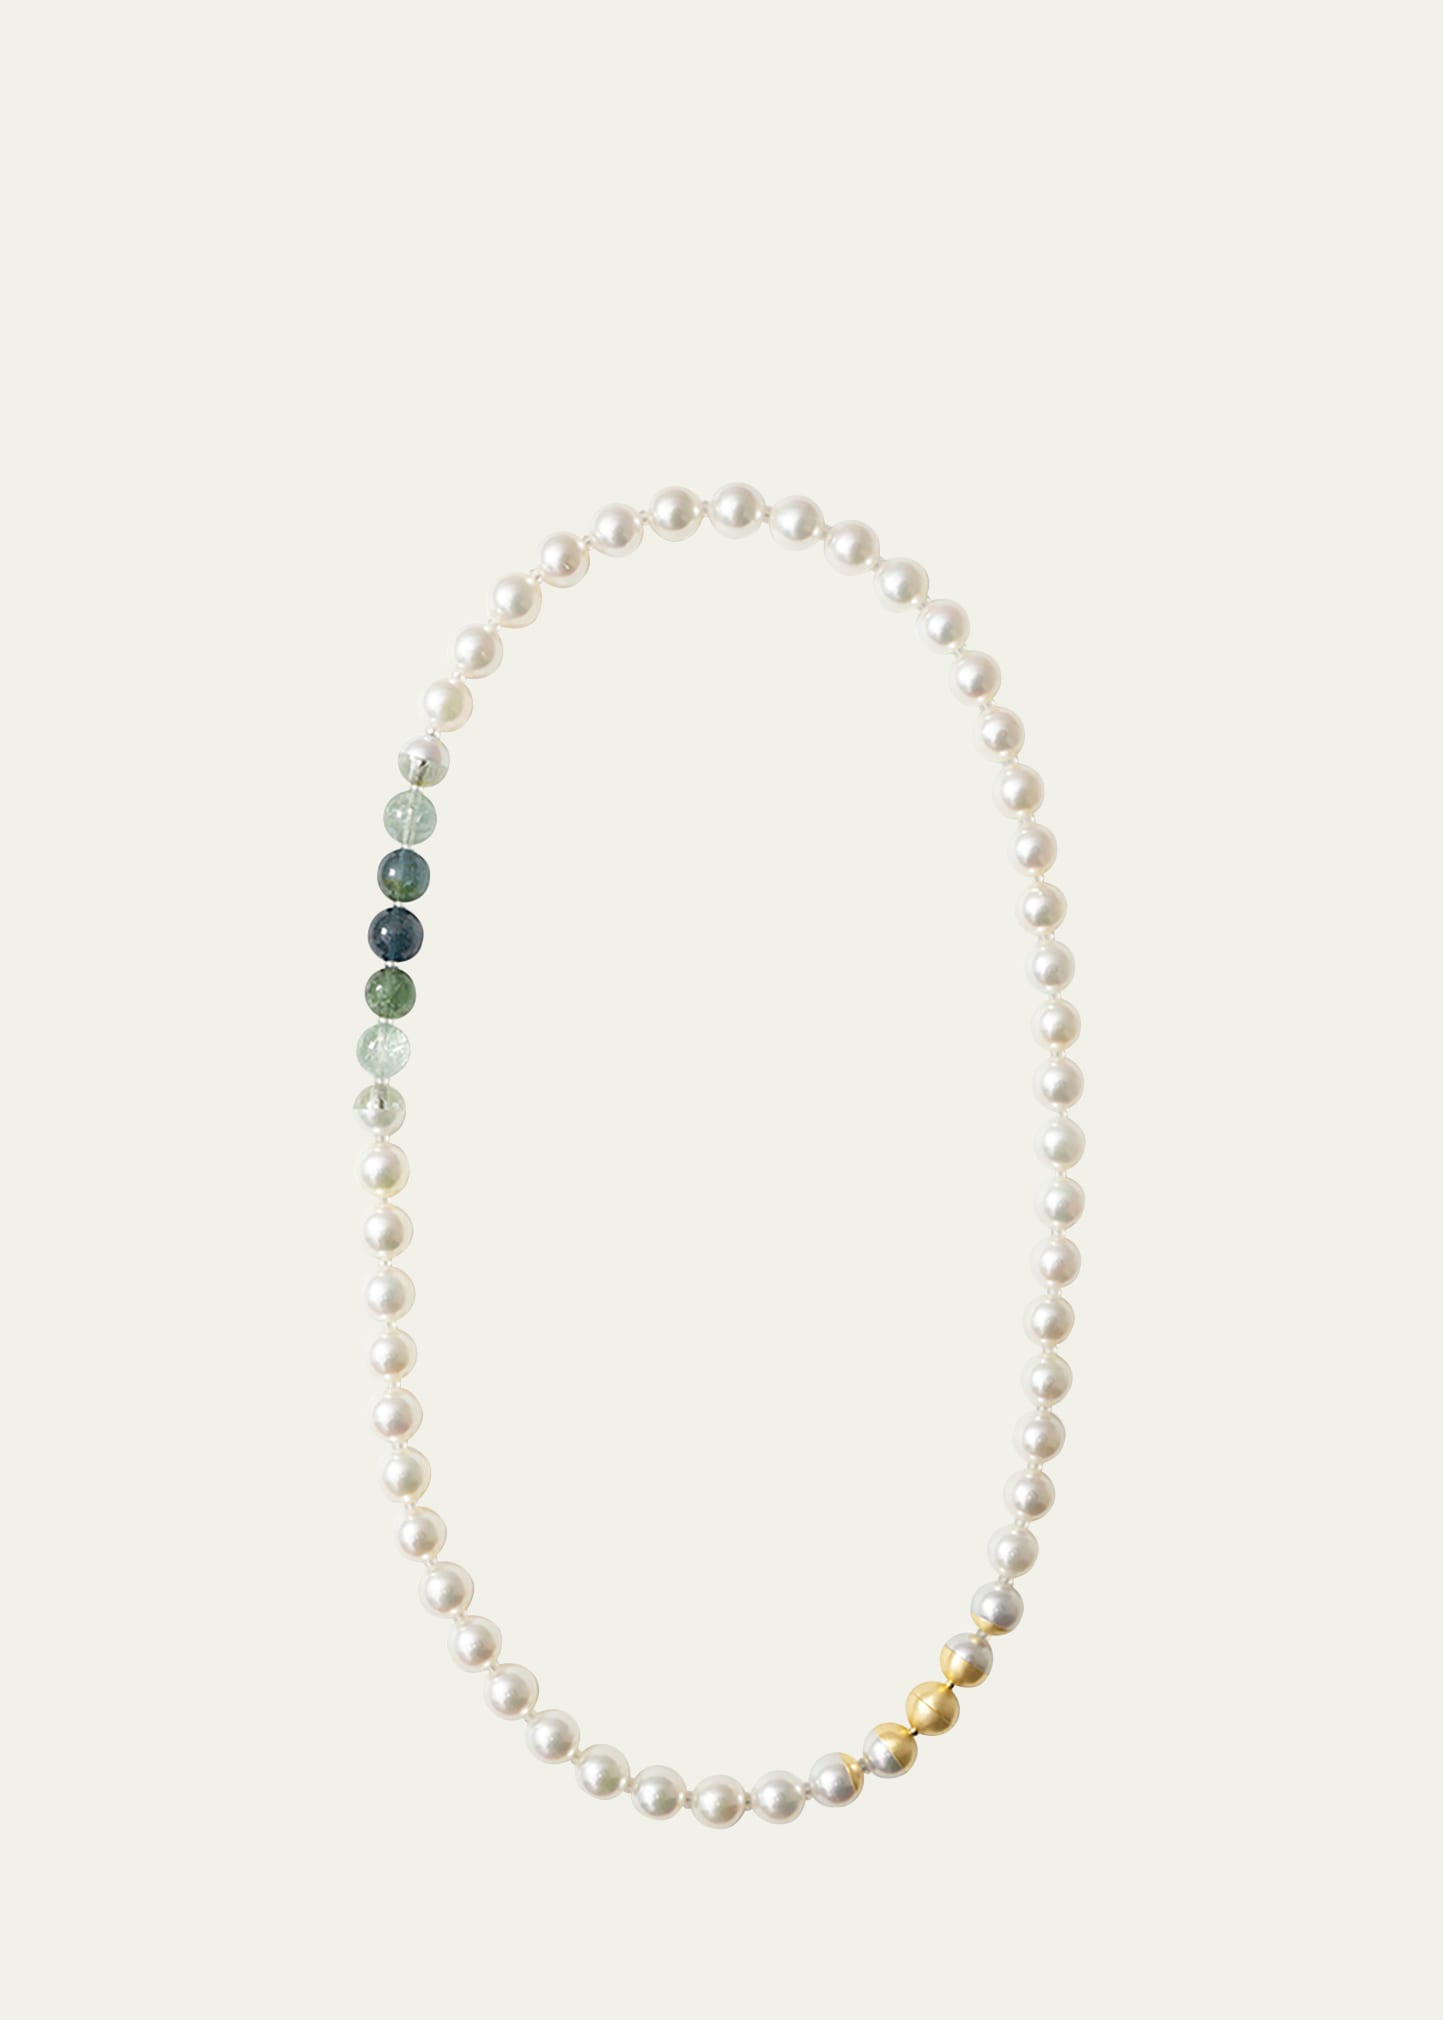 18K Yellow Gold Sectional Pearl Necklace with Tourmaline and Cultured White Akoya Pearls